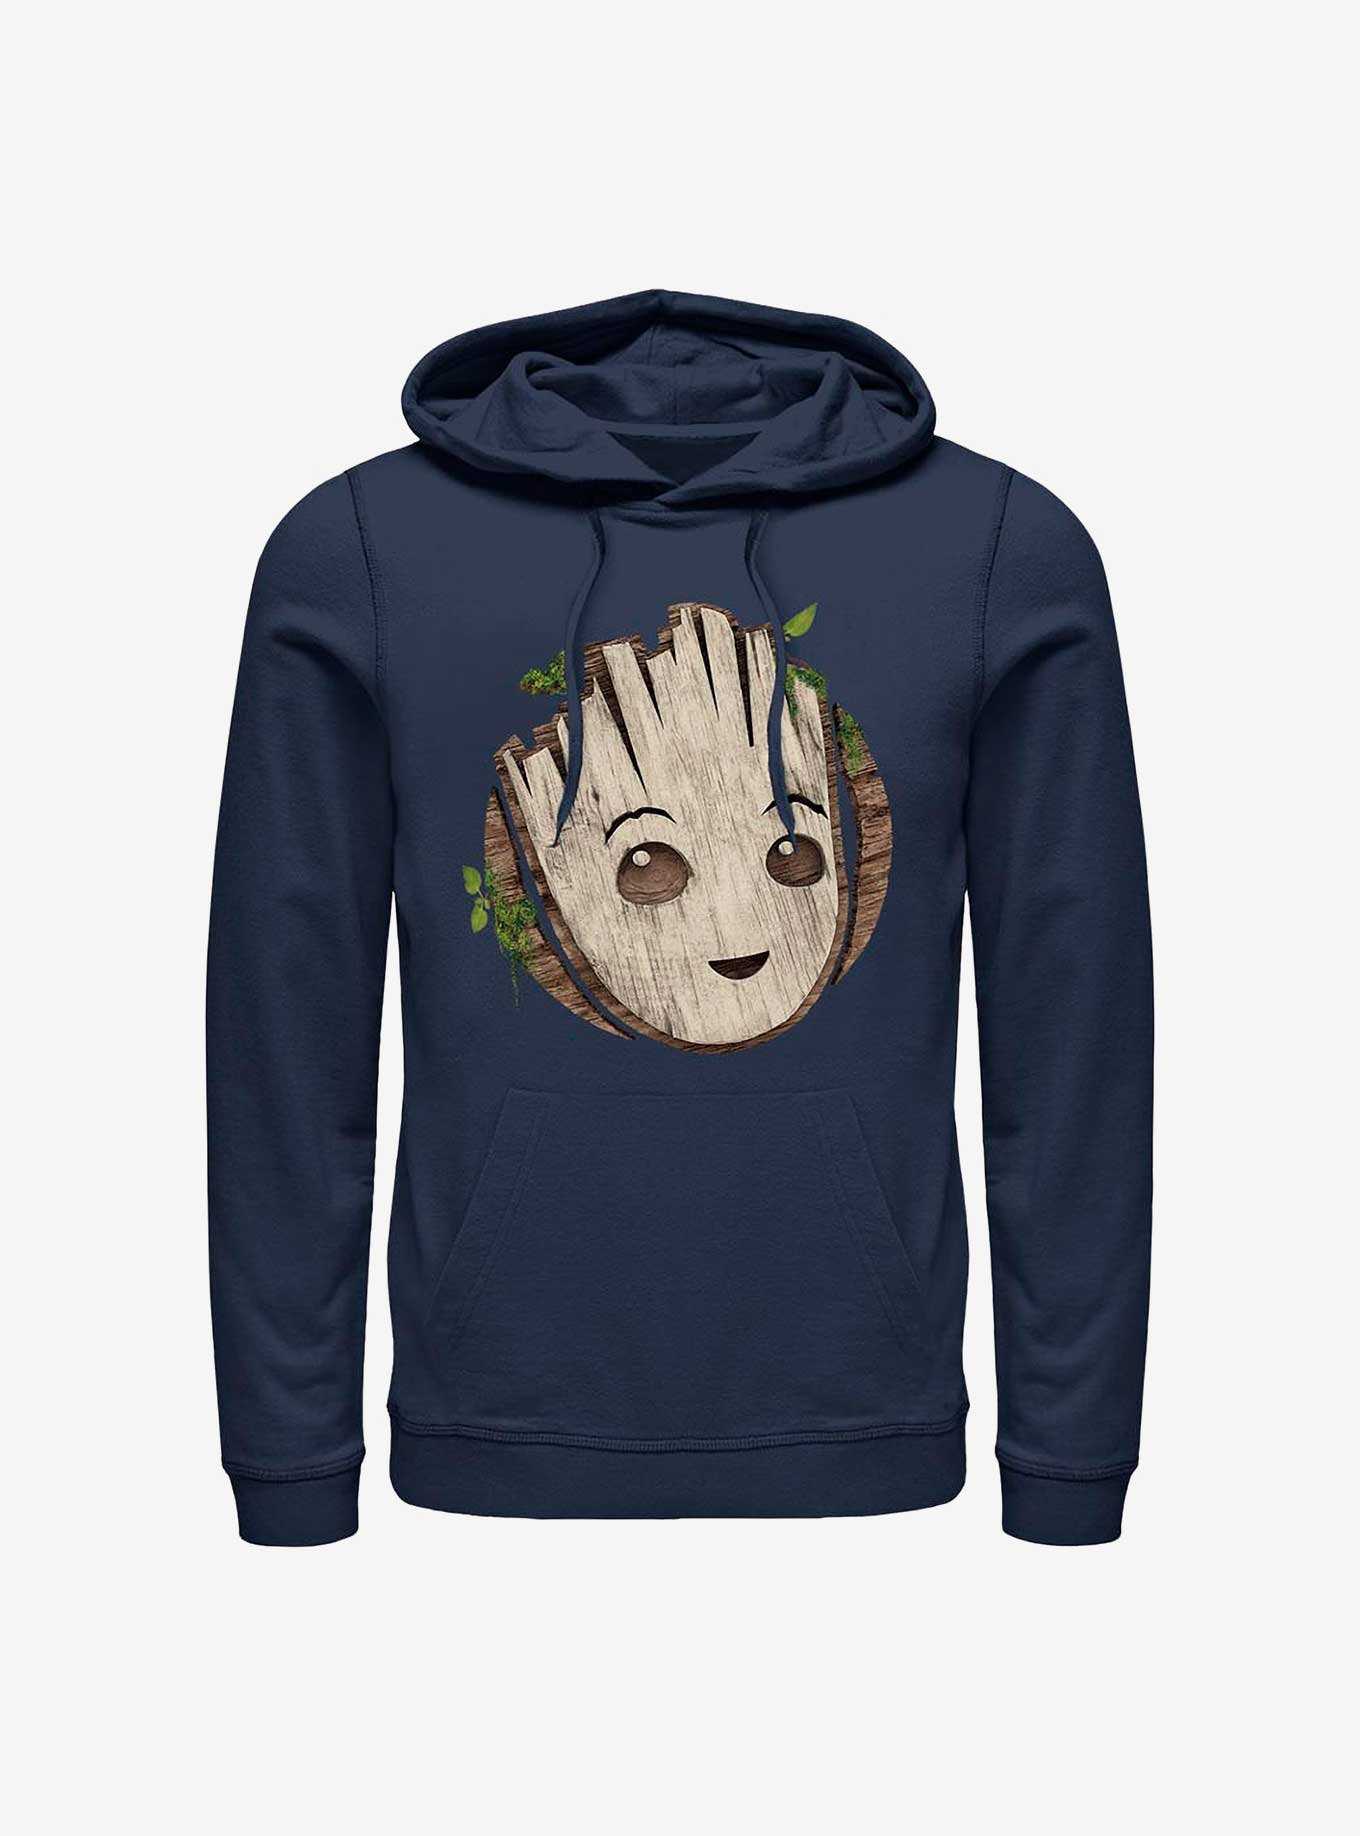 Groot Merch & Gifts